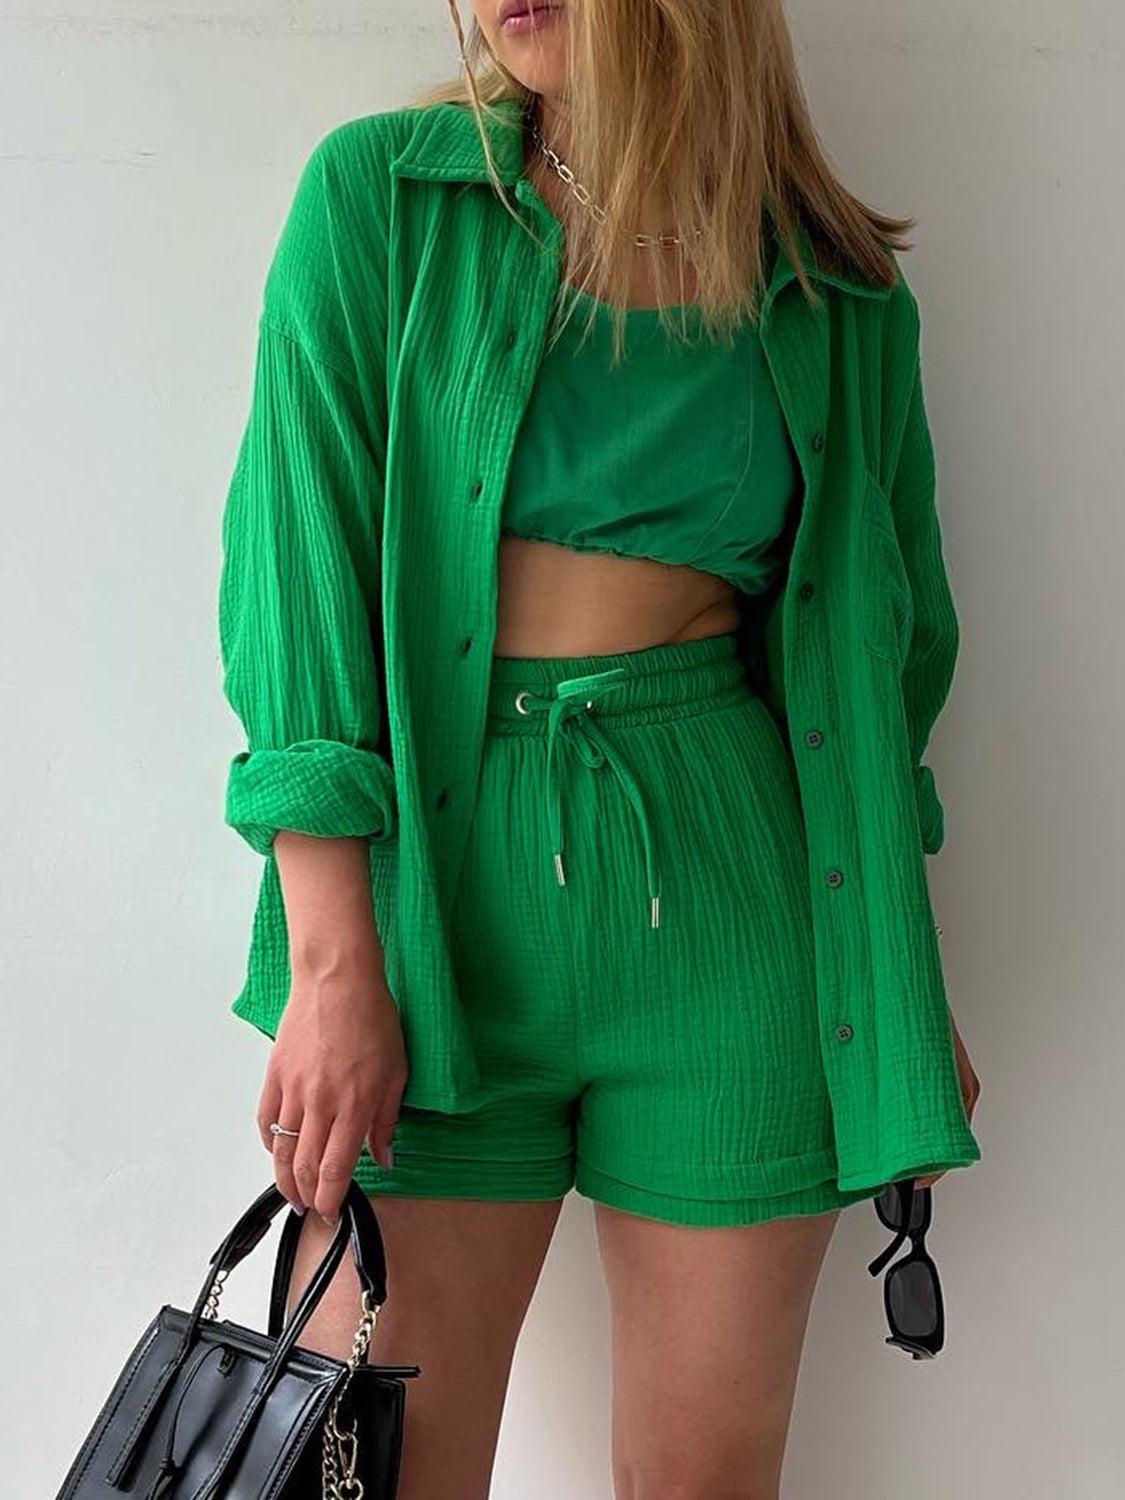 a woman in a green shirt and shorts holding a black purse